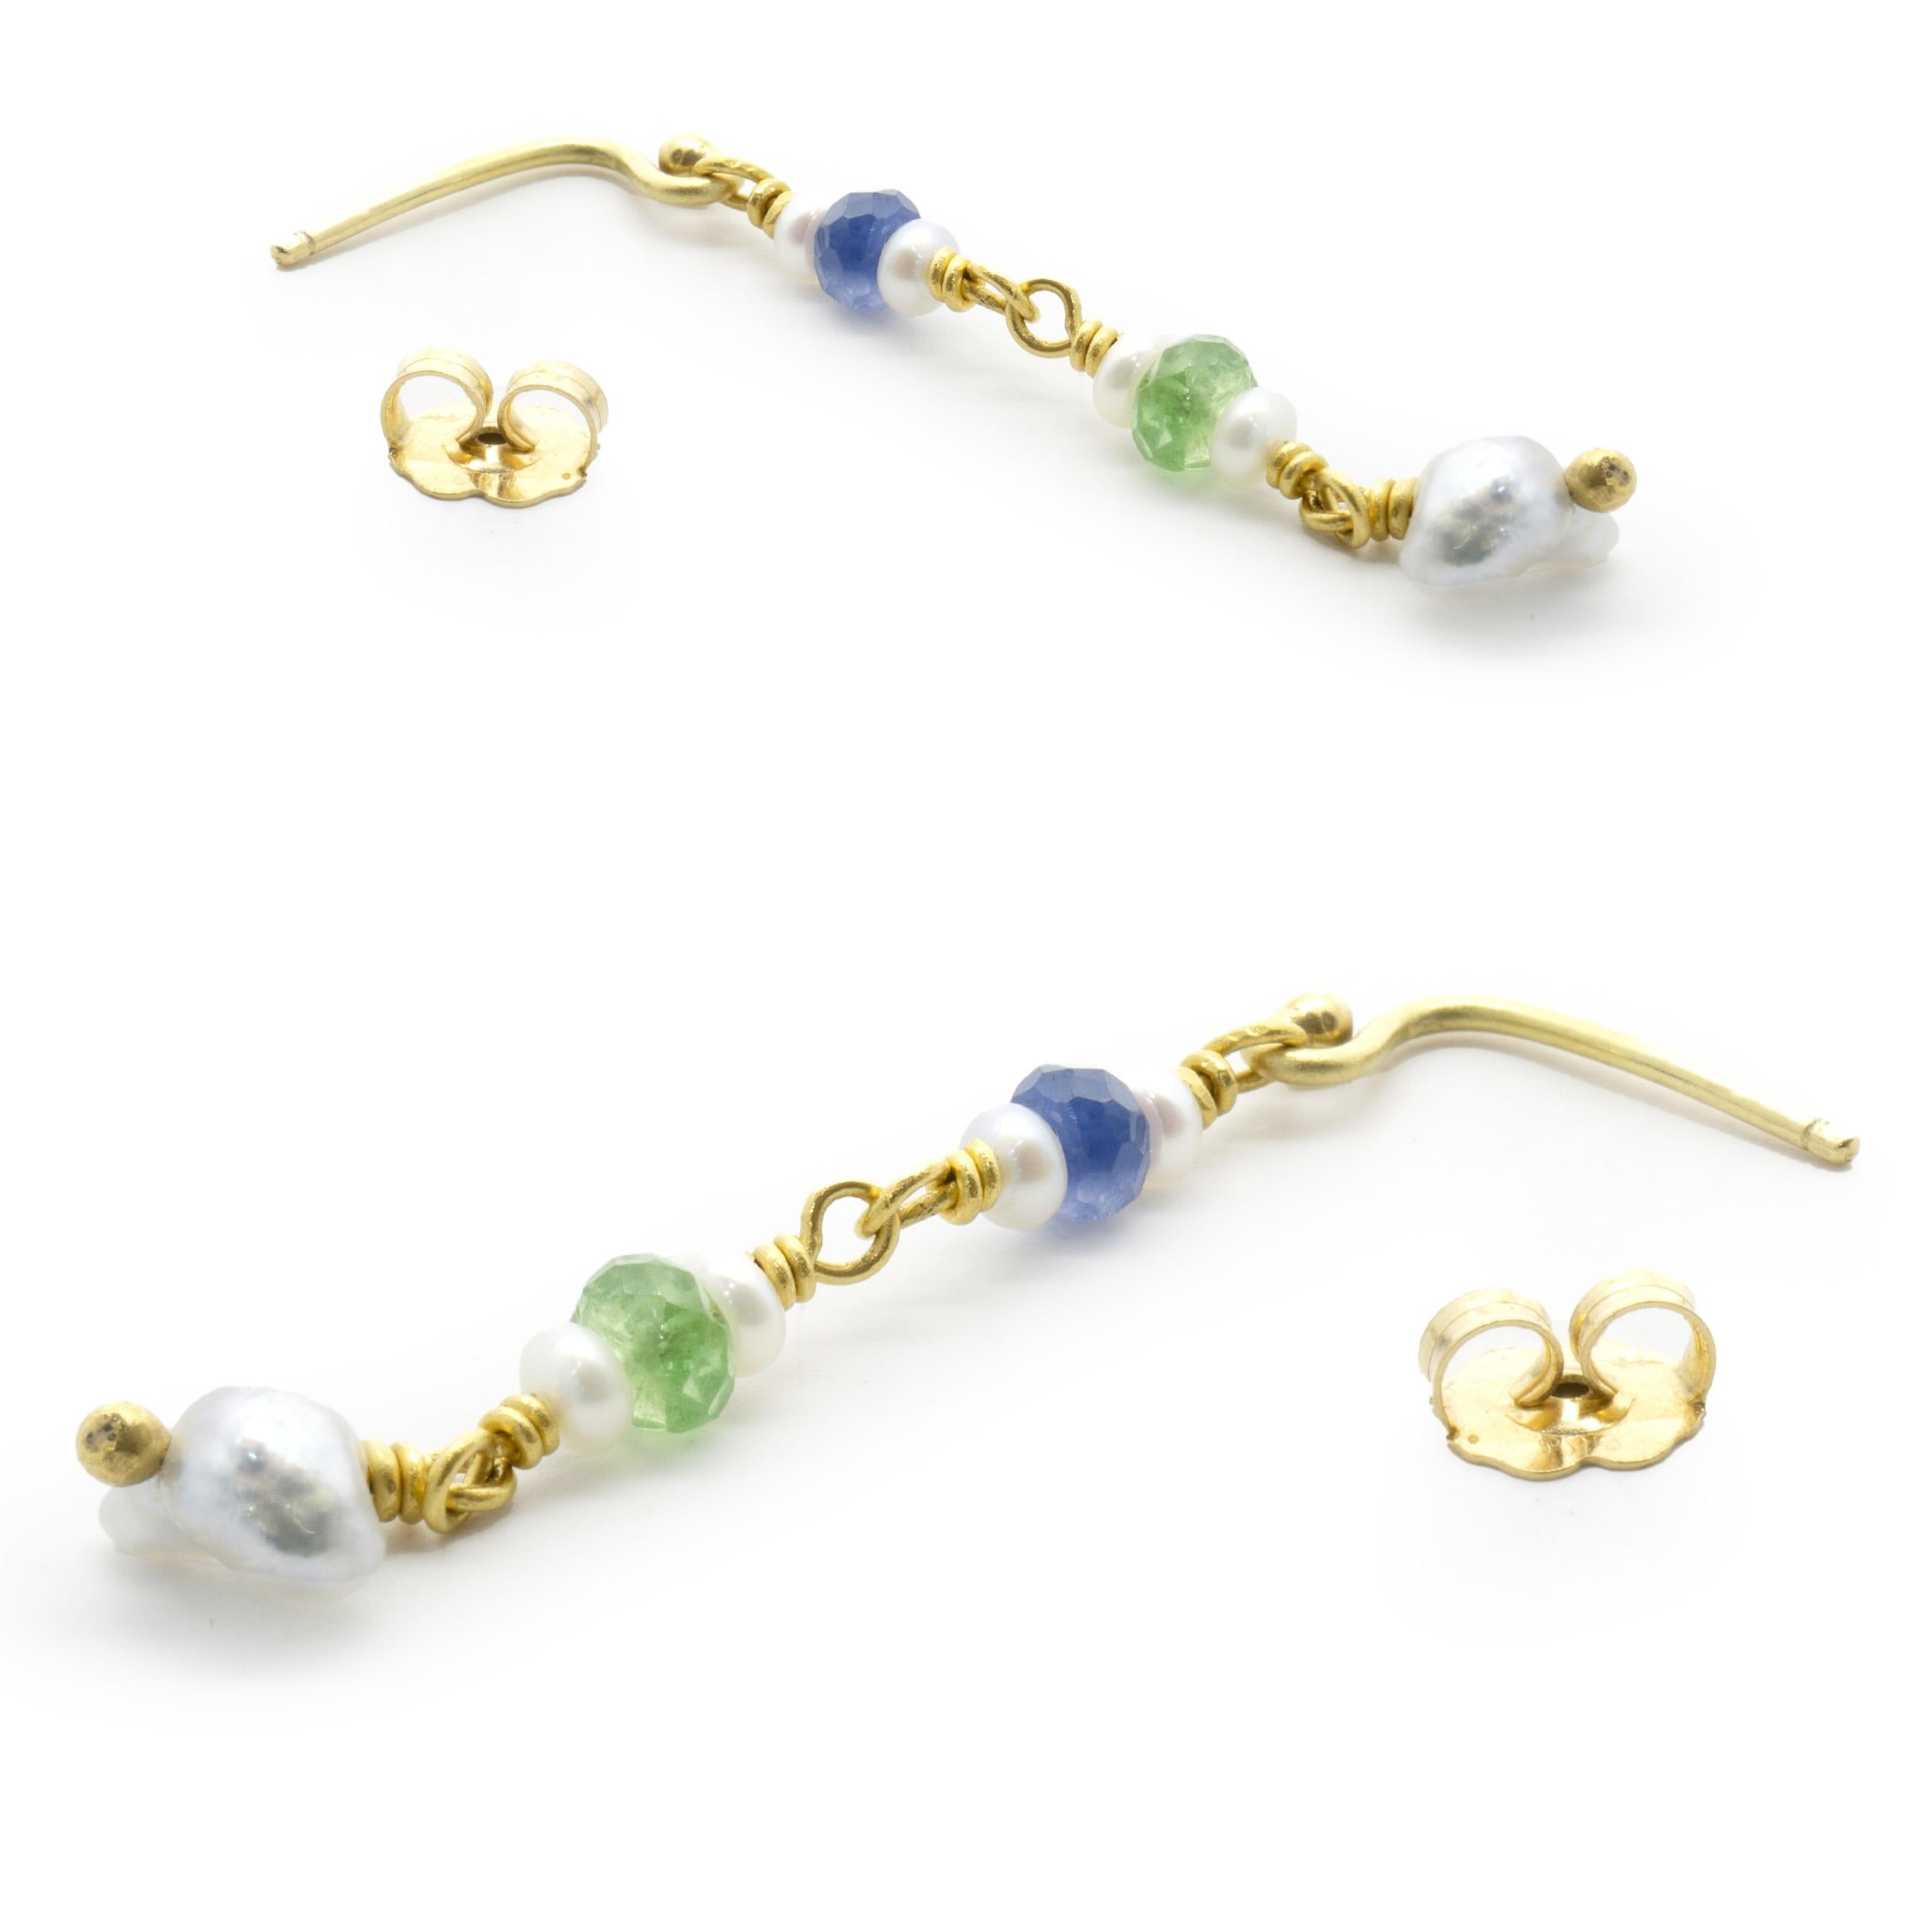 Beau Soleil 18/22k Yellow Gold Pearl, Tourmaline, and Sapphire Drop Earrings In Excellent Condition For Sale In Scottsdale, AZ